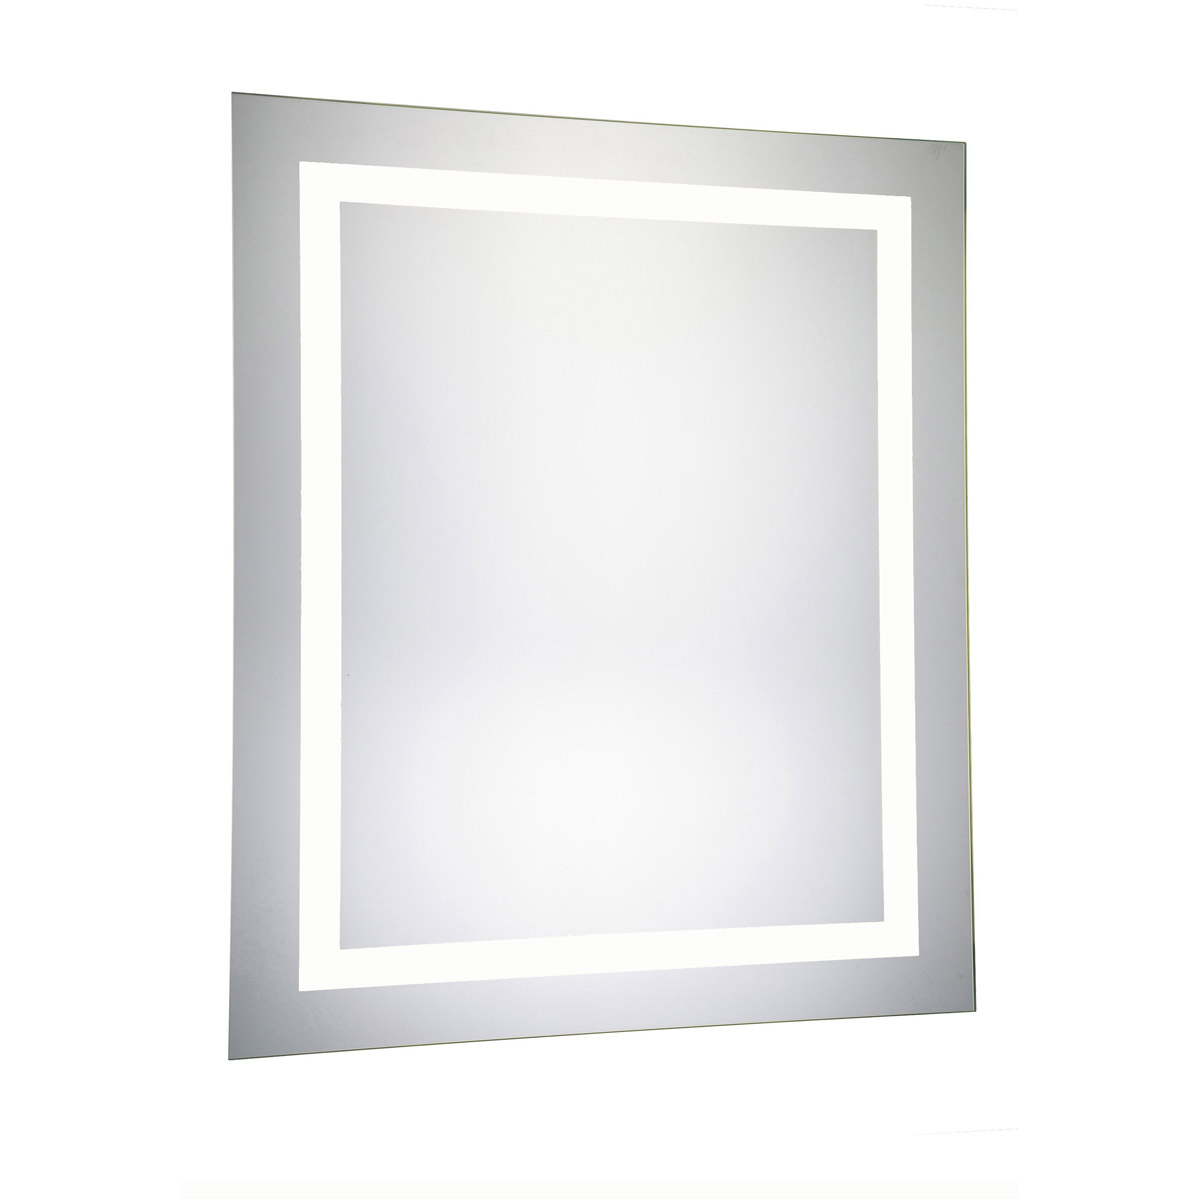 4 Sides Led Electric Mirror Rectangle Dimmable 5000k - 32 X 40 In.